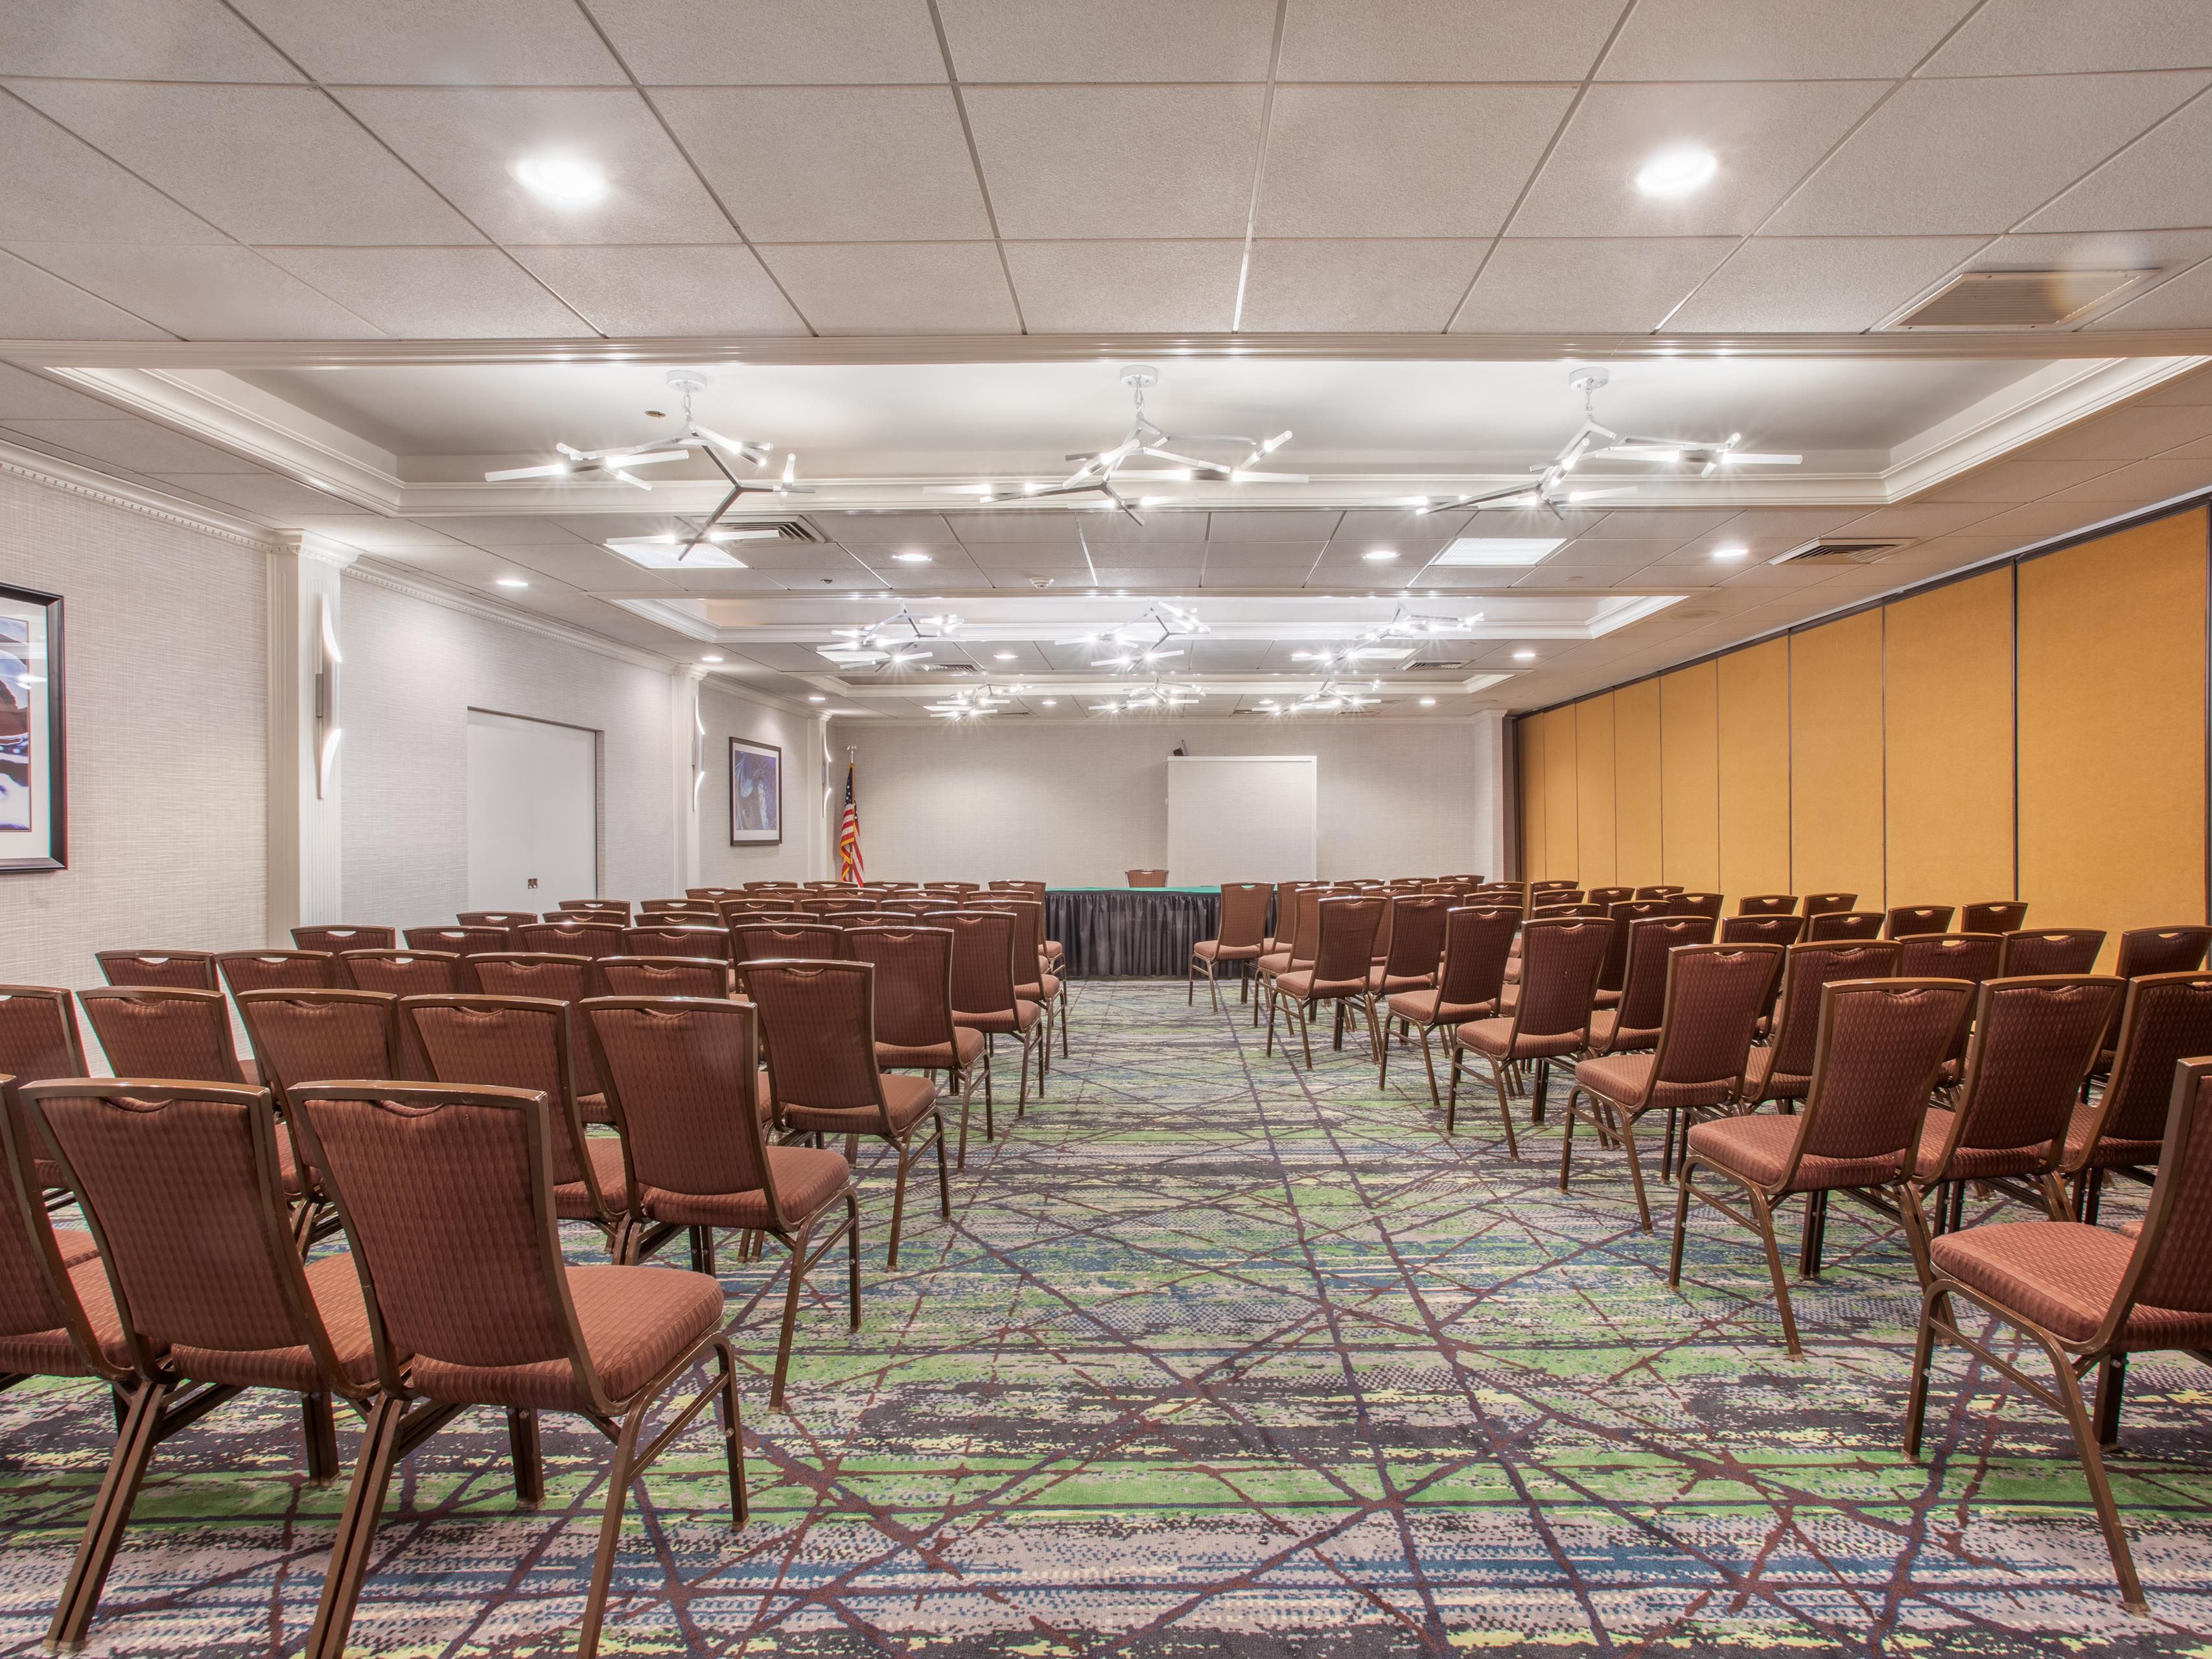 With three flexible meeting rooms, free Wi-Fi access, full-service catering, and sophisticated AV equipment, we're well equipped to host conferences and social gatherings in Parsippany, NJ. Let the hotel's dedicated staff help you start planning today.